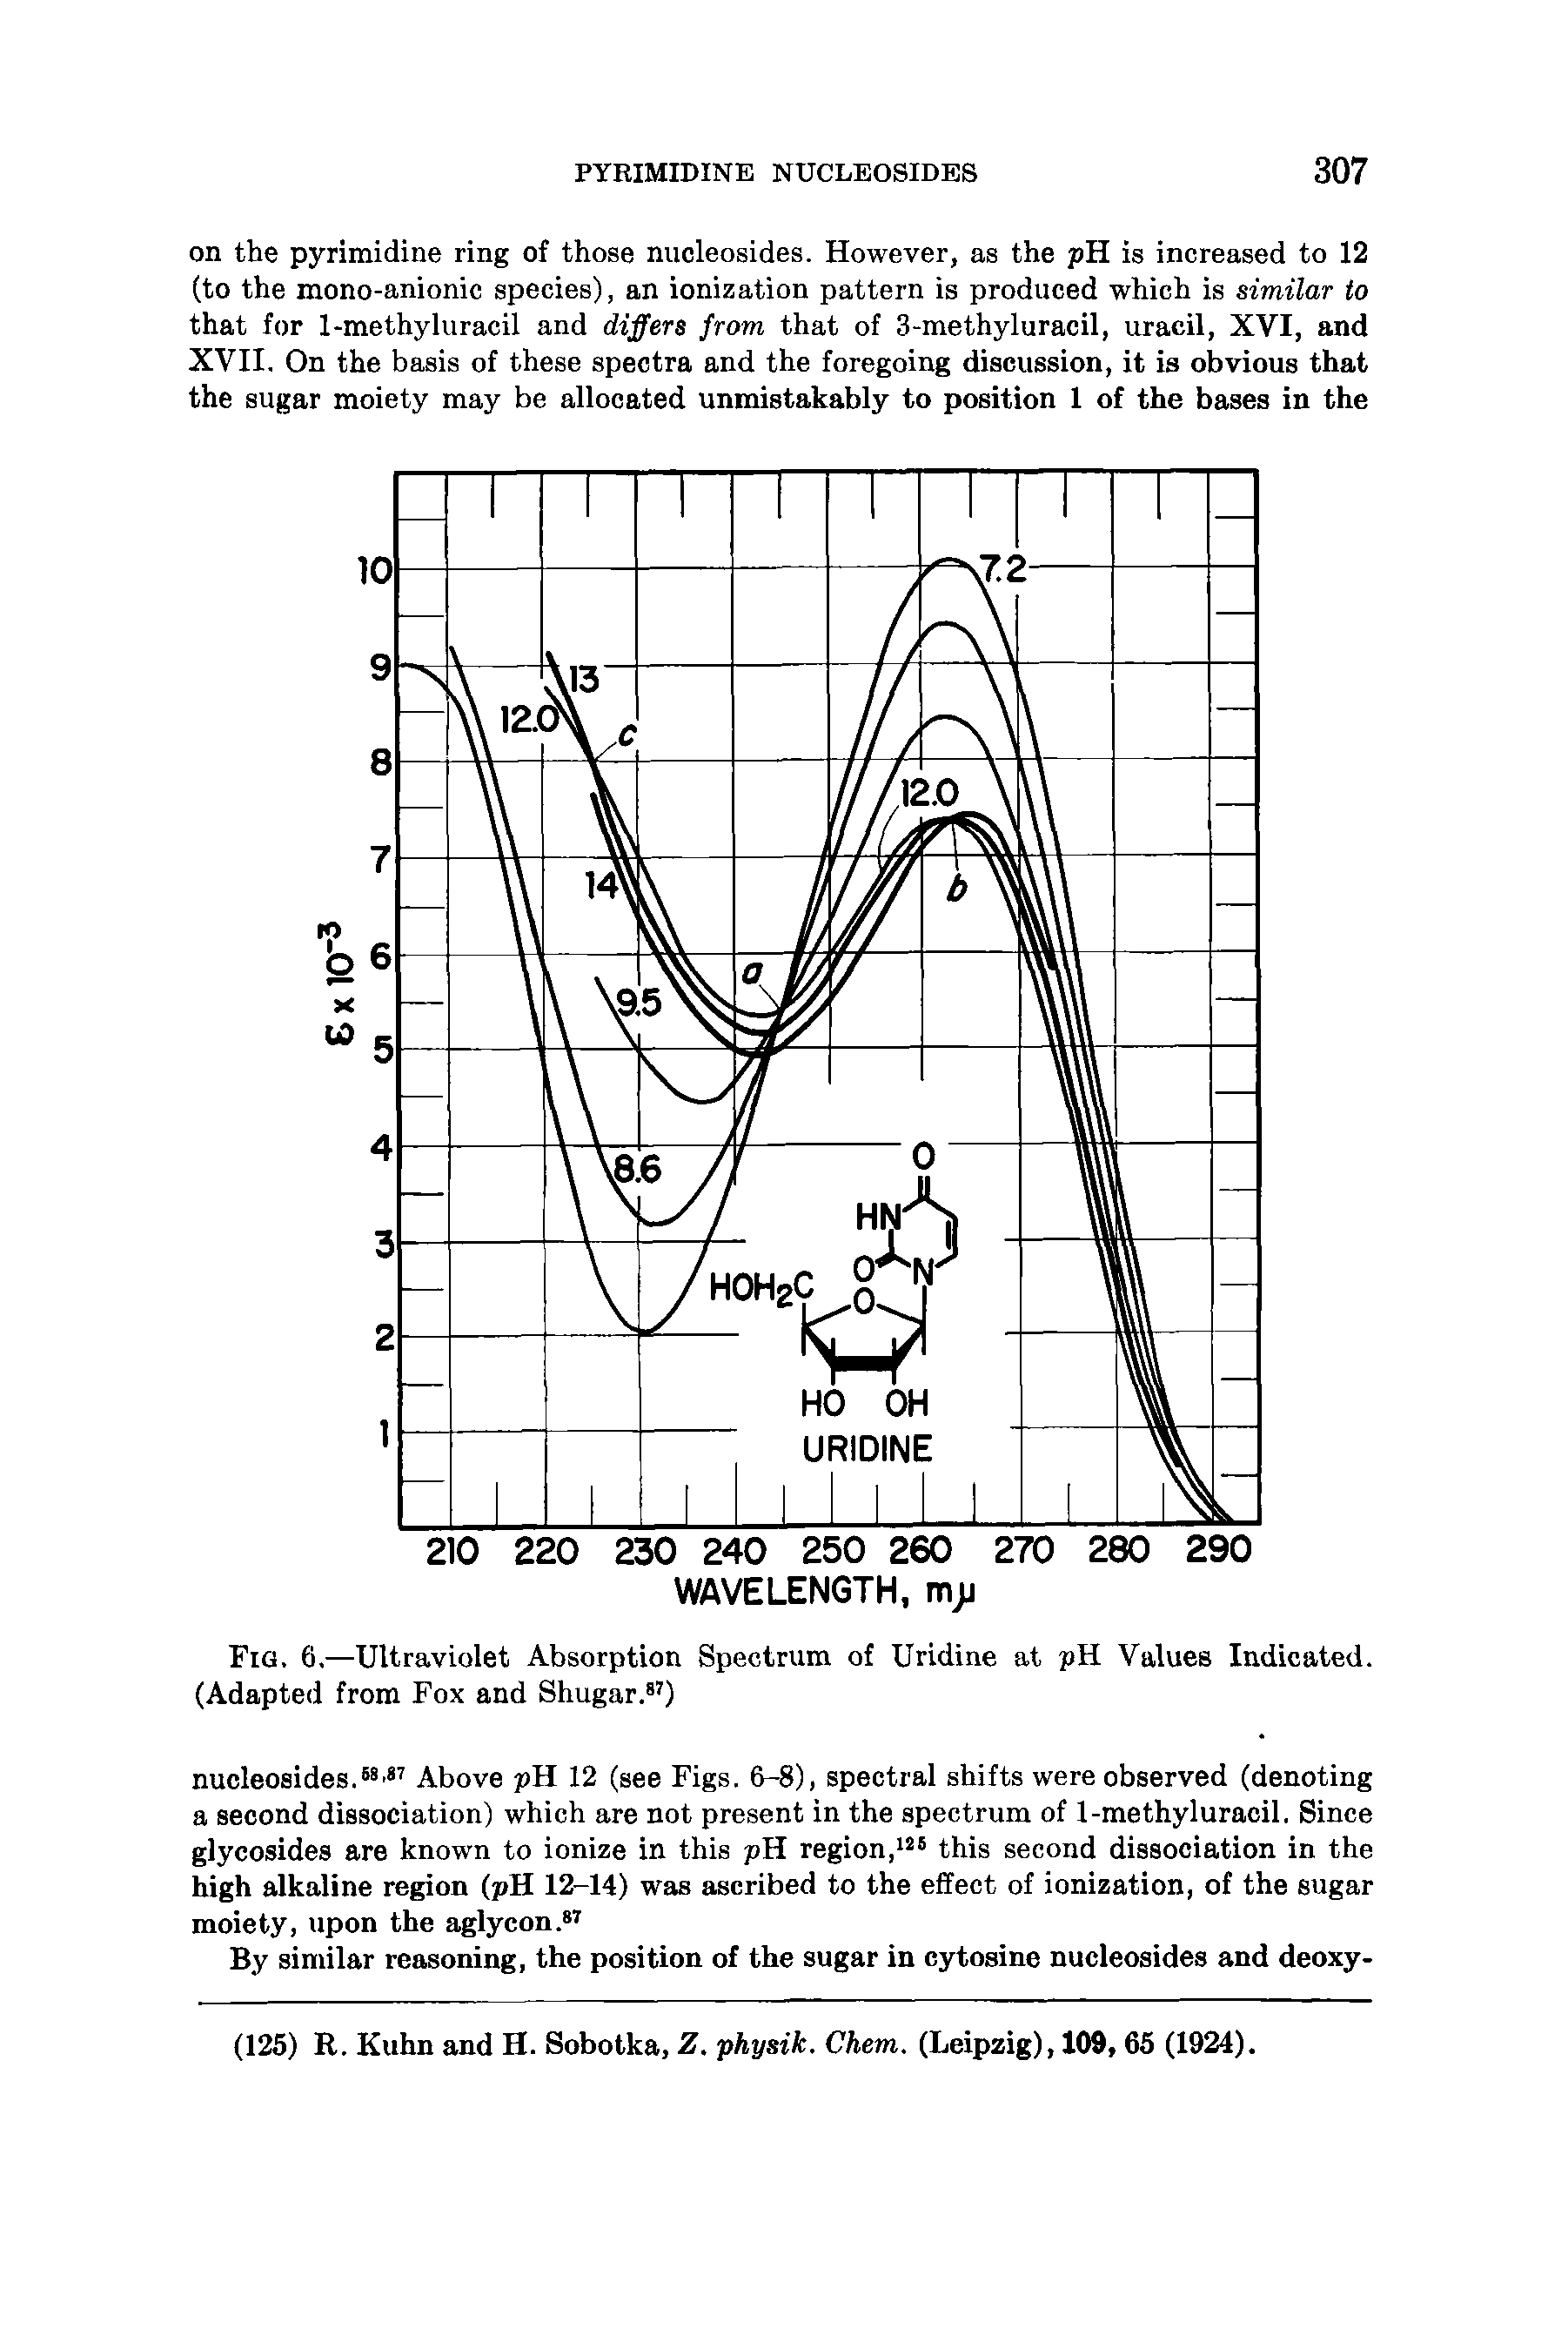 Fig. 6.—Ultraviolet Absorption Spectrum of Uridine at pH Values Indicated. (Adapted from Fox and Shugar.87)...